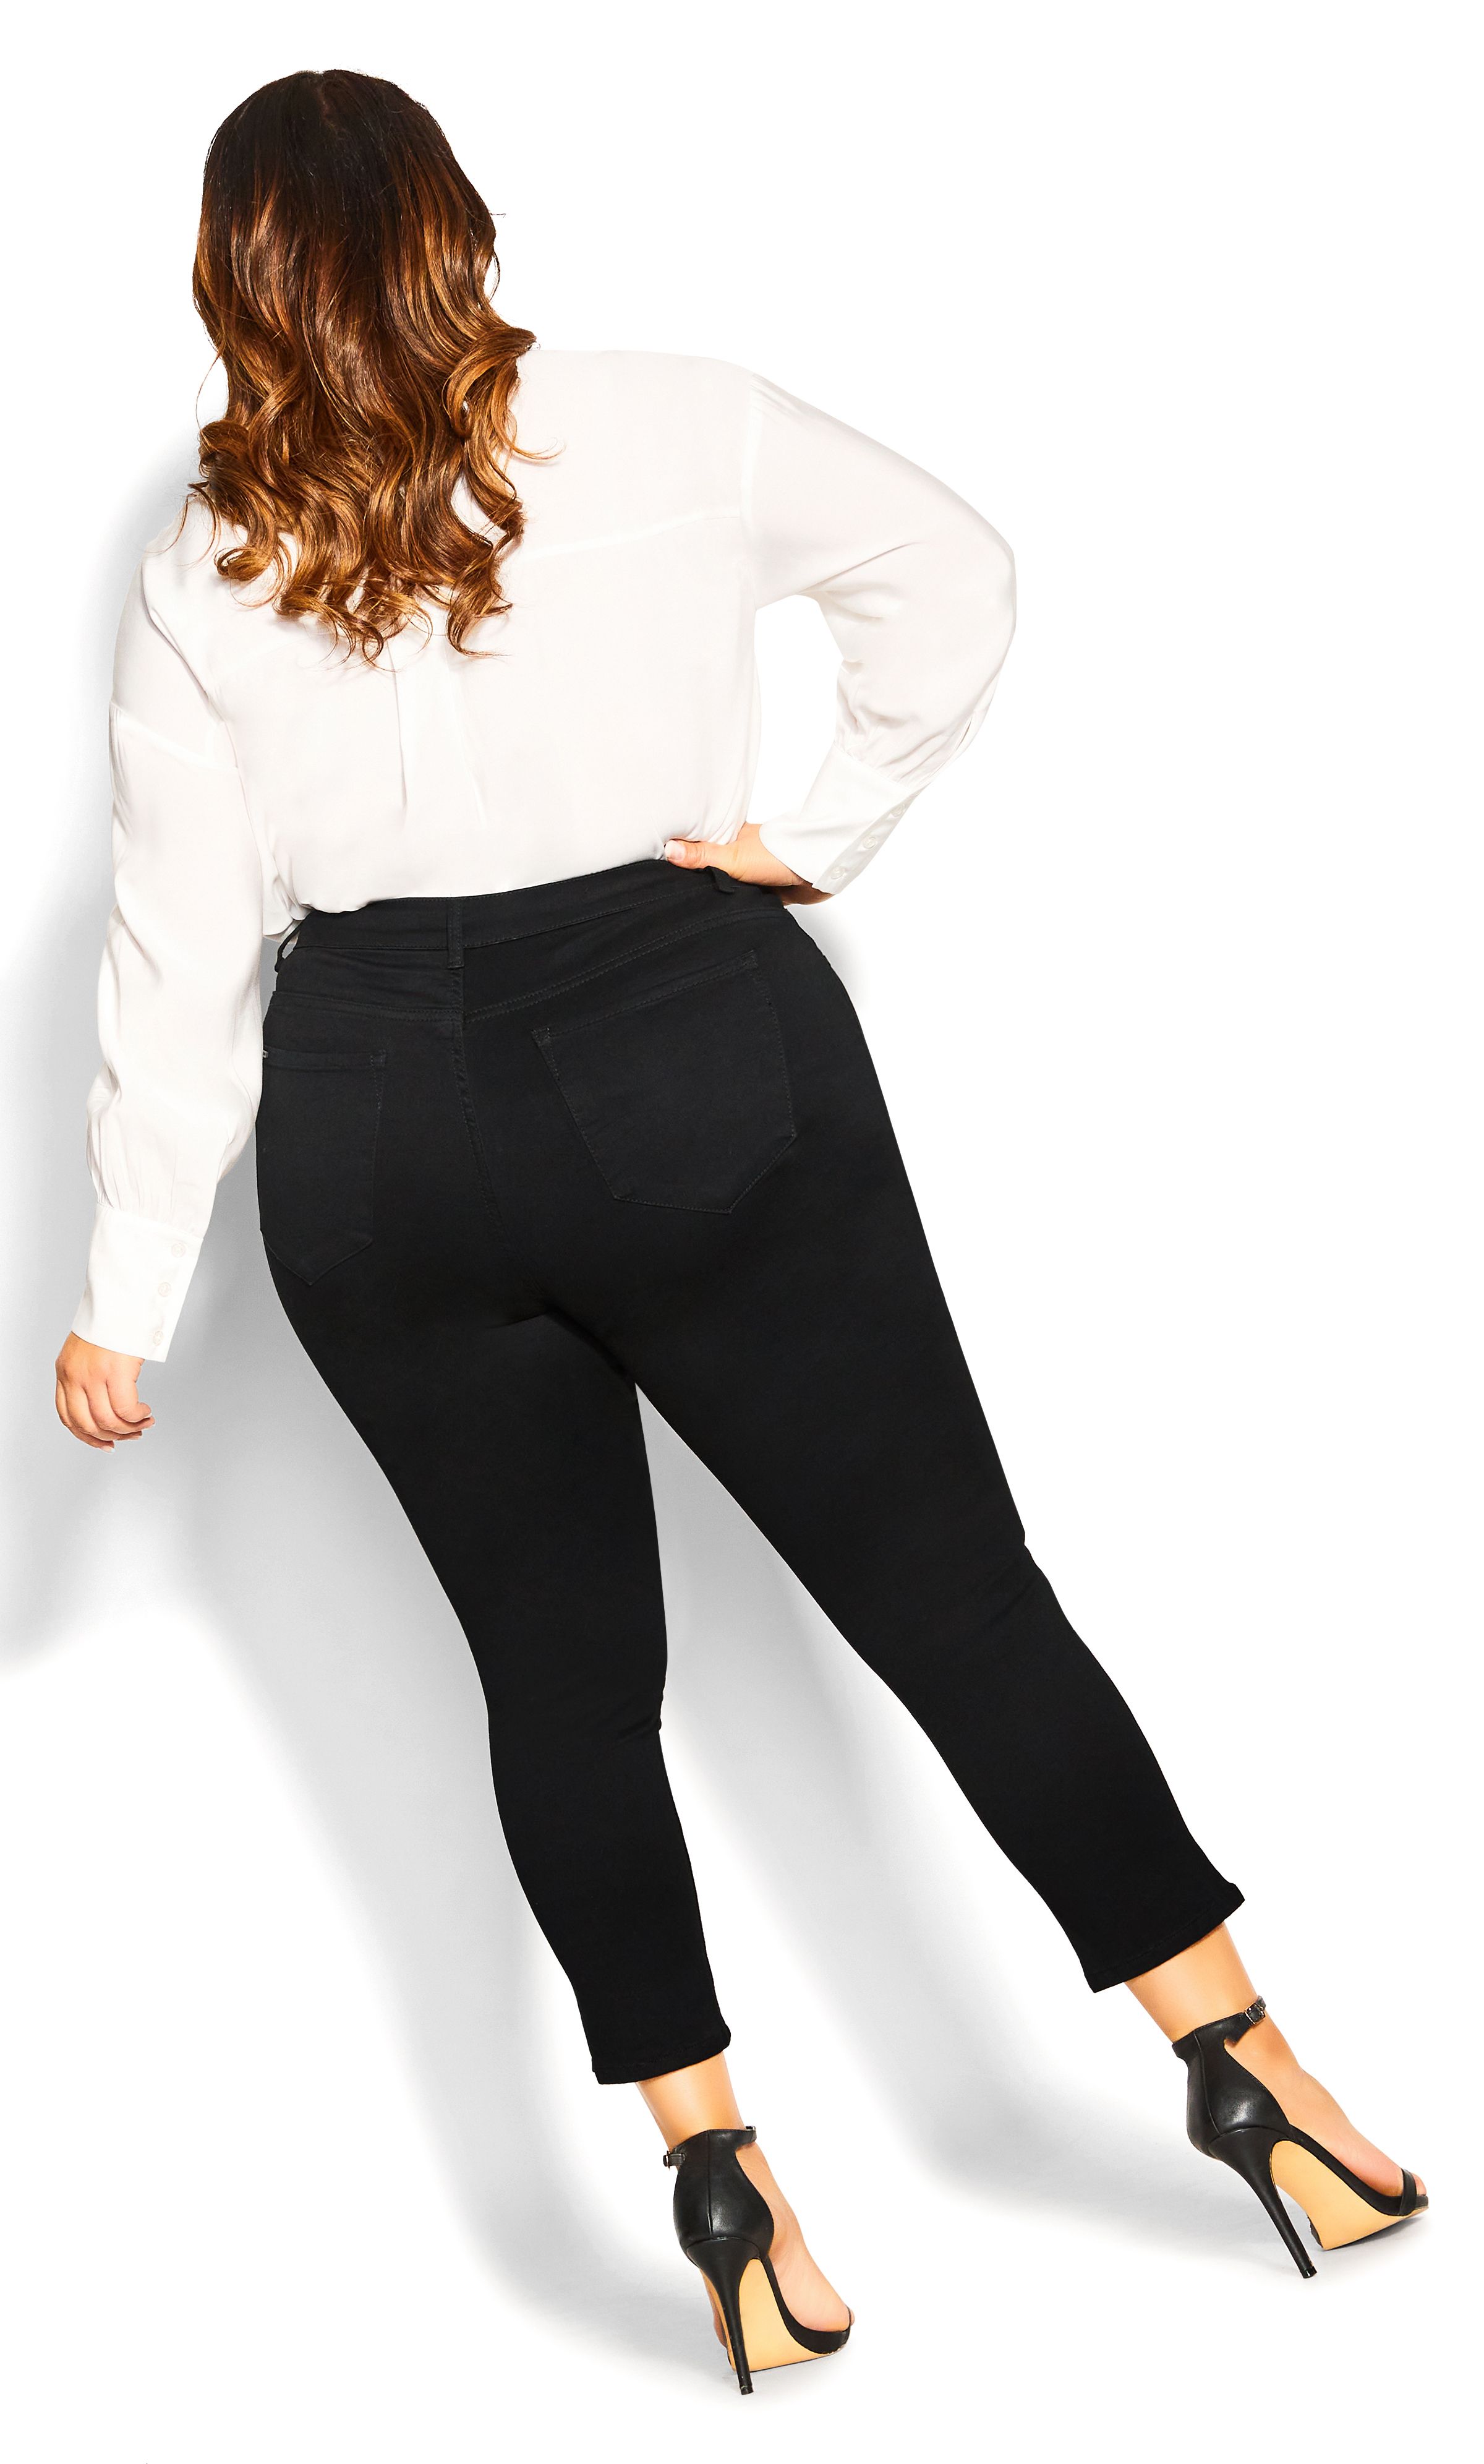 Keep your curves on fleek this season in the utterly form-flattering stylings of our Harley Renegade Jean! A fashion-forward addition to any denim collection, these jeans feature a mid rise cut, cropped length and sleek black denim finish. Key Features Include: - Harley: the perfect fit for an hourglass body shape - Mid rise - Single button & zip fly closure - 4-pocket denim styling - Stretch cotton blend fabrication - Skinny leg - High denim fibre retention to maintain shape - Signature Chic Denim hardware throughout zips, buttons and rivets - Cropped length For a night out, team with a lace-trimmed bodysuit, strappy pumps and statement earrings.